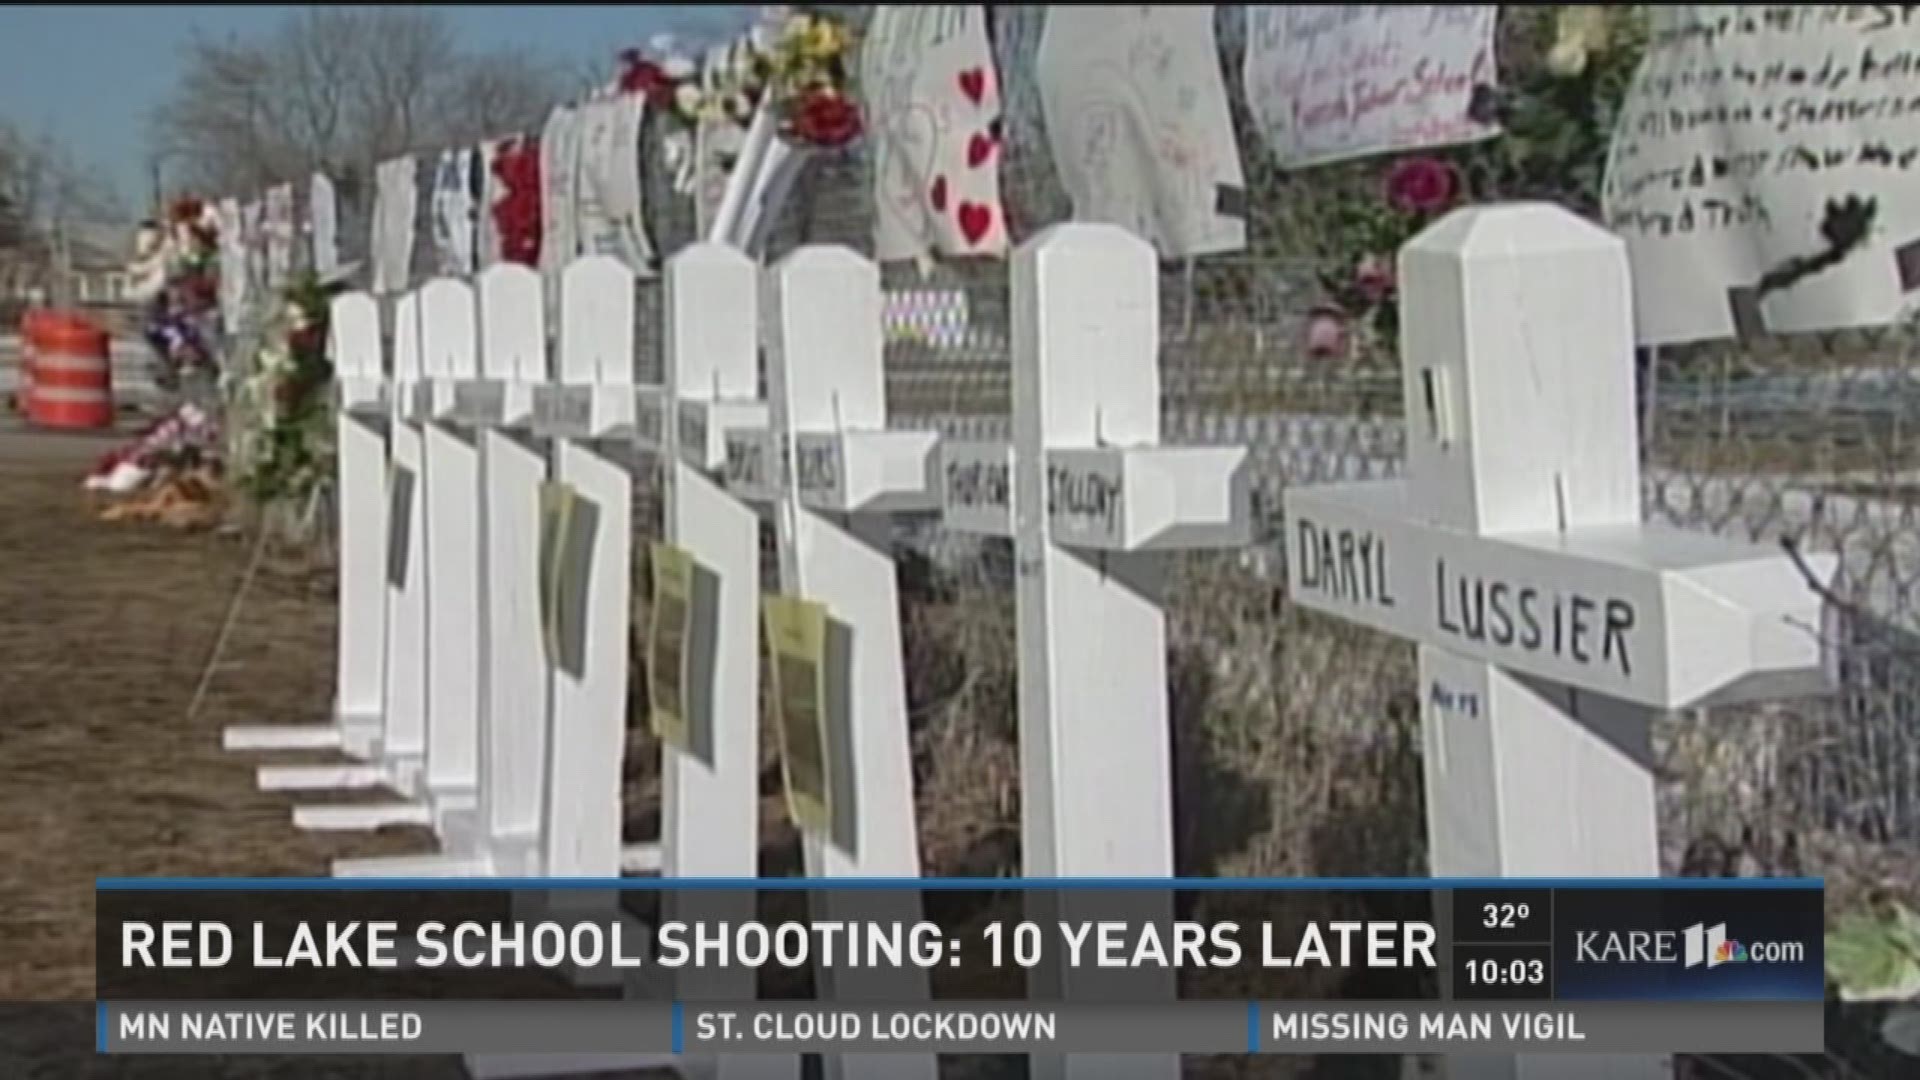 Red Lake school shooting 10 years later